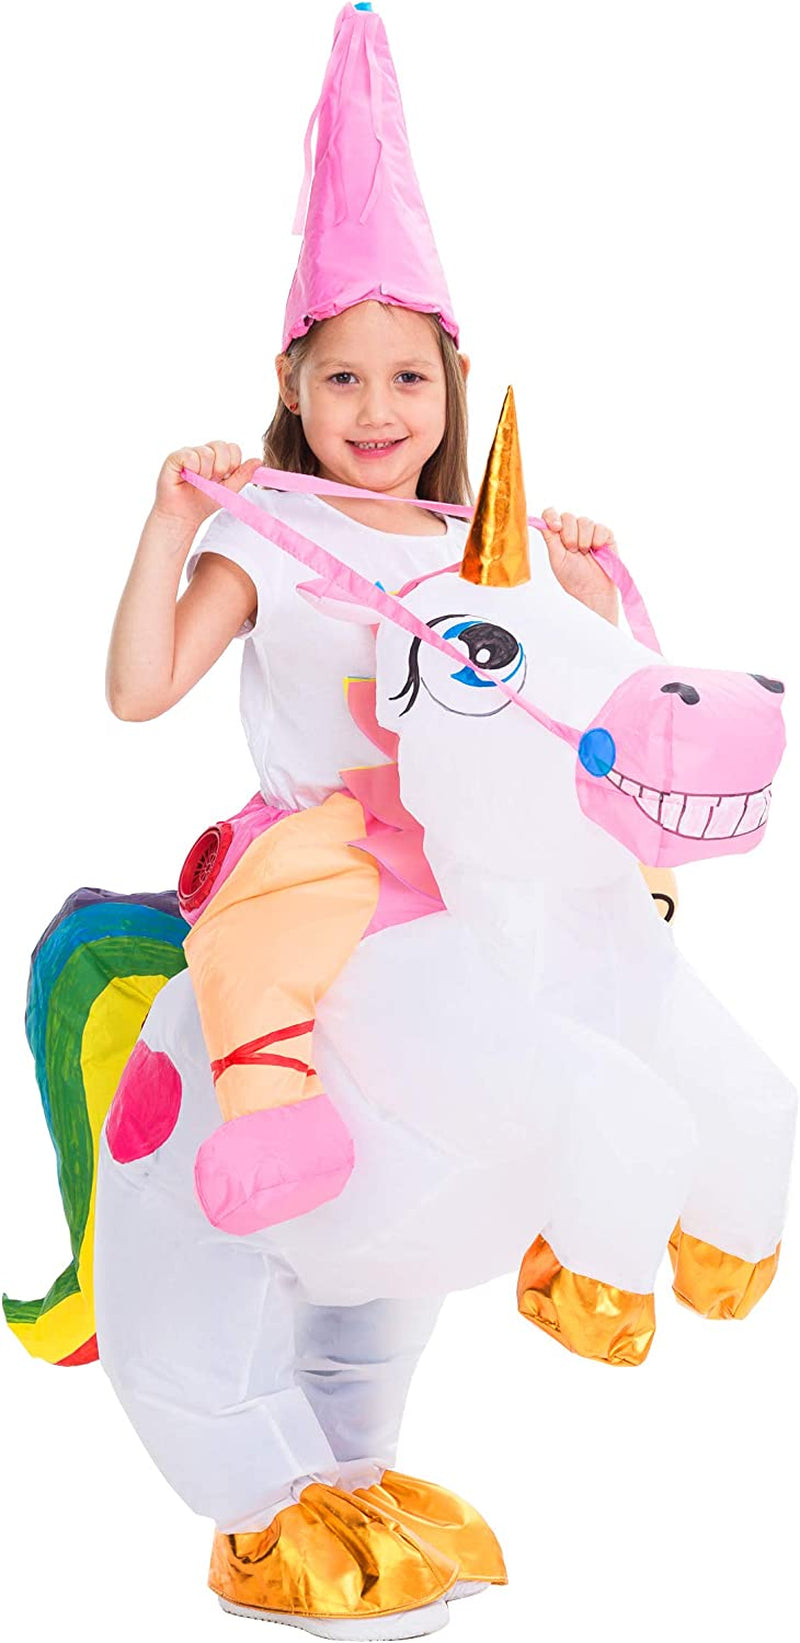 Spooktacular Creations Inflatable Costume Riding a Unicorn Air Blow-Up Deluxe Halloween Costume  Joyin Inc   